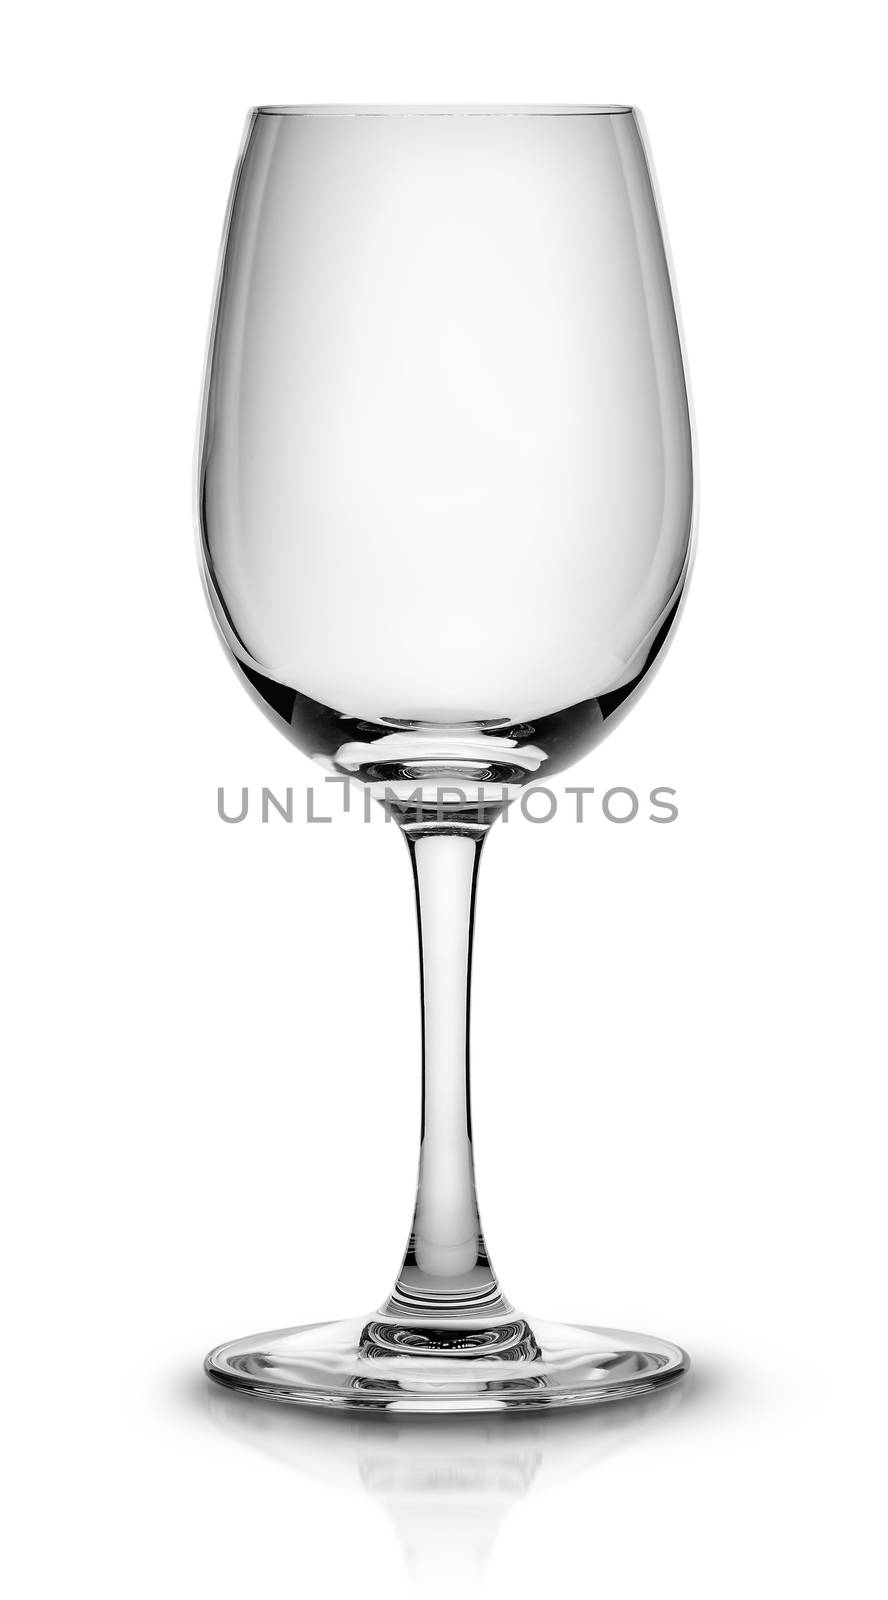 Empty wine glass for white wine isolated on white background